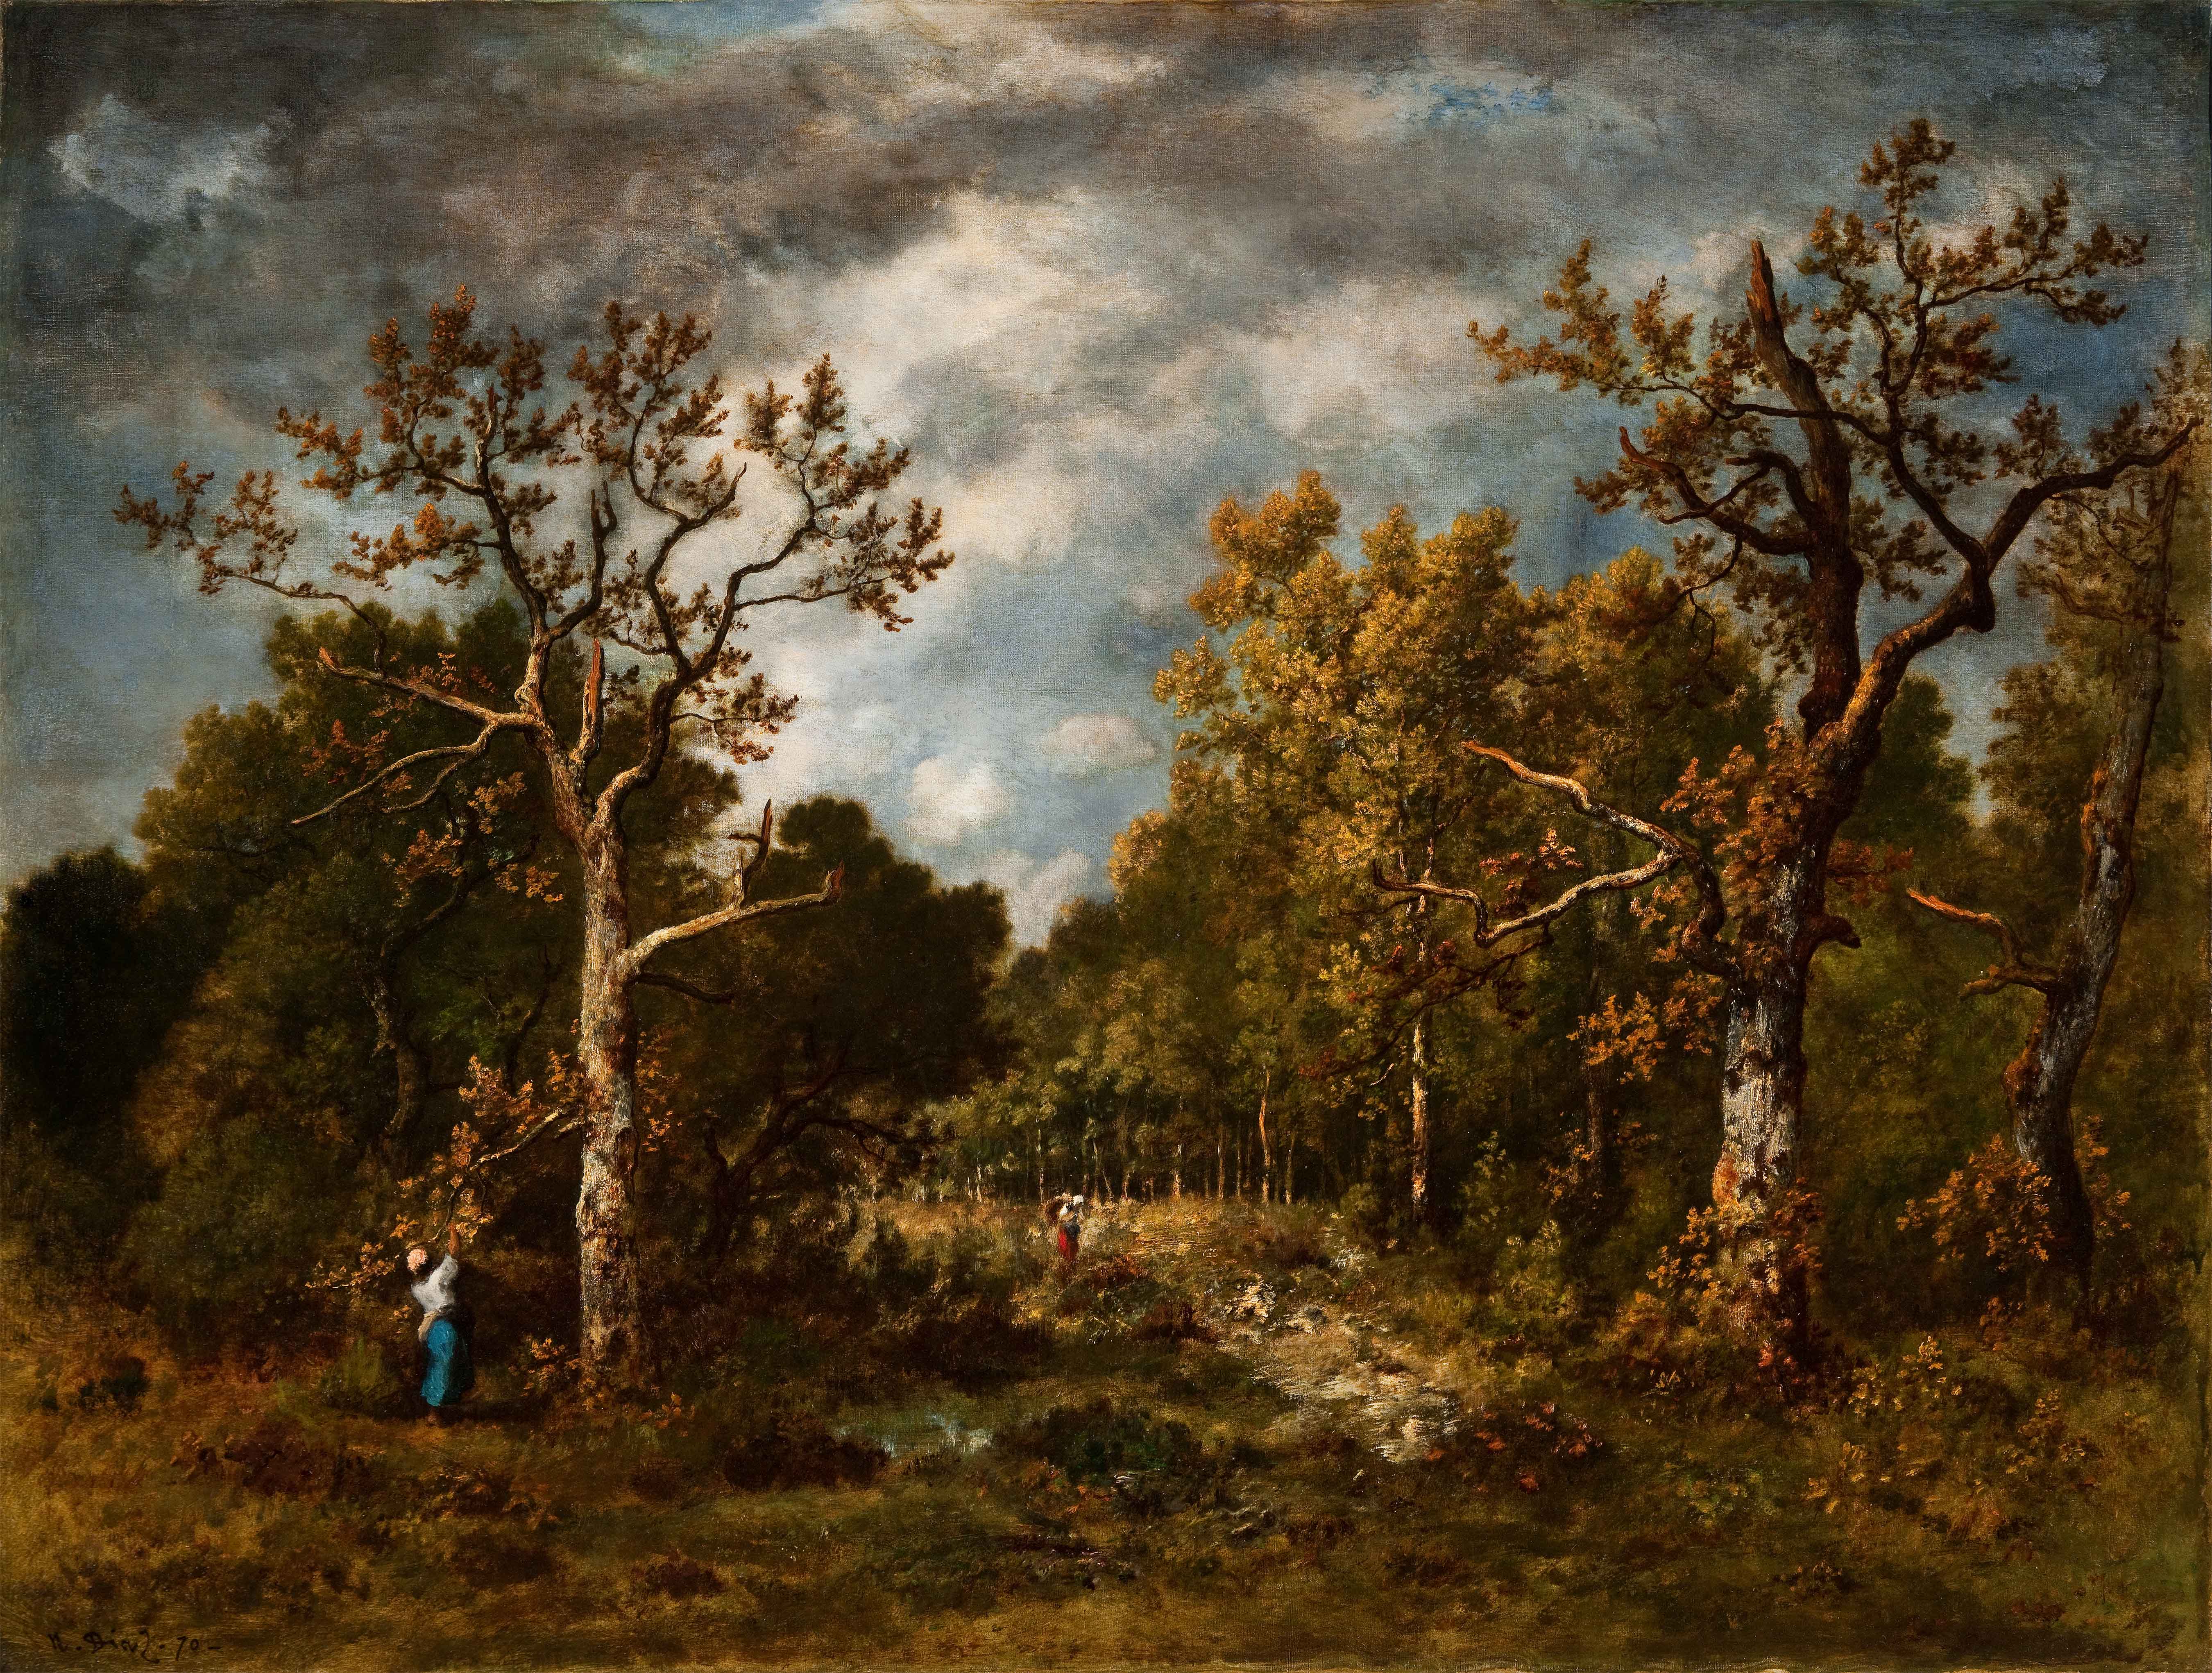 Narcisse Virgile Diaz de la Peña (French, 1807–1876), Early Autumn: Forest of Fontainebleau, 1870, oil on canvas. Taft Museum of Art, Bequest of Charles Phelps Taft and Anna Sinton Taft, 1931.464